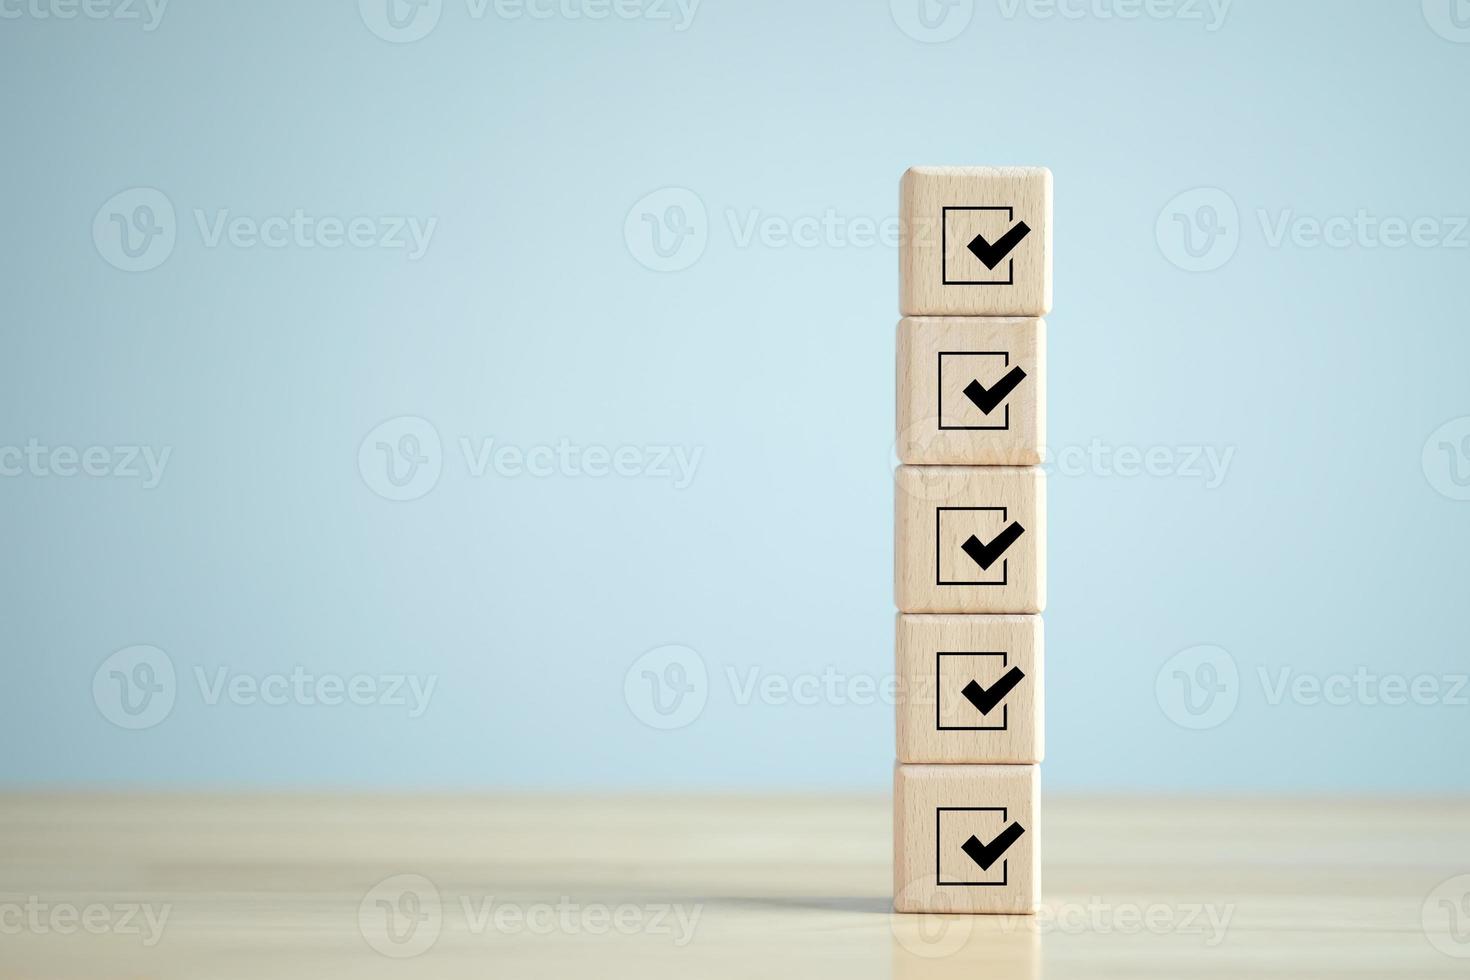 Checklist, Task list, Survey and assessment. Quality Control. Goals achievement and business success. Check mark icon on wooden blocks. photo